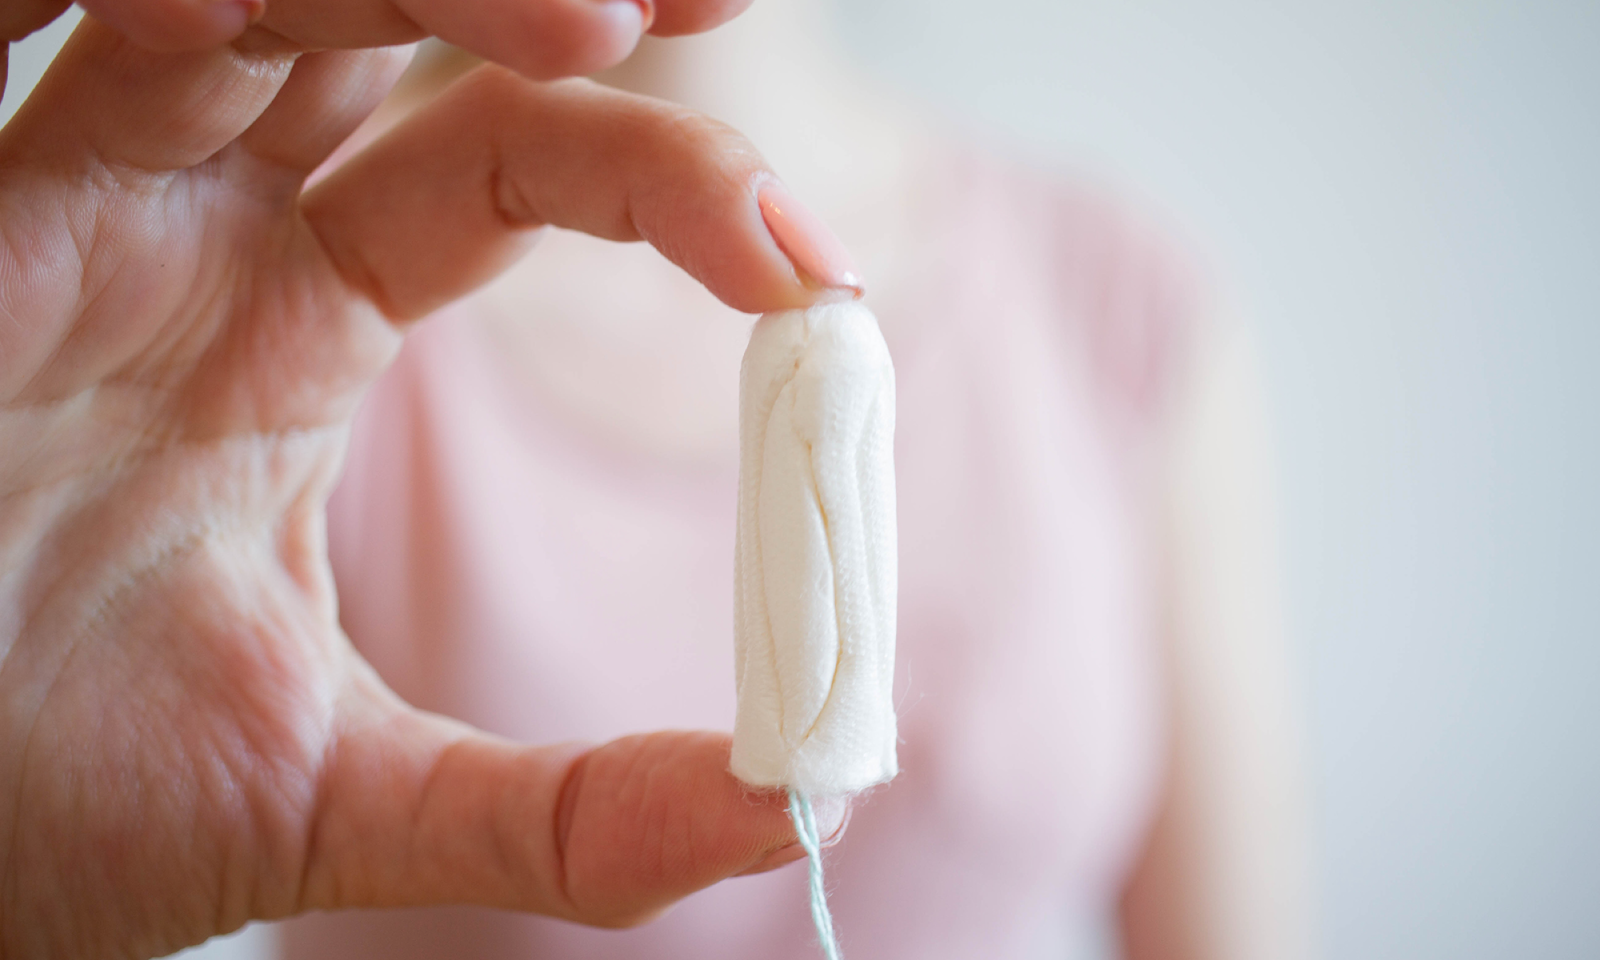 What is Toxic Shock Syndrome?